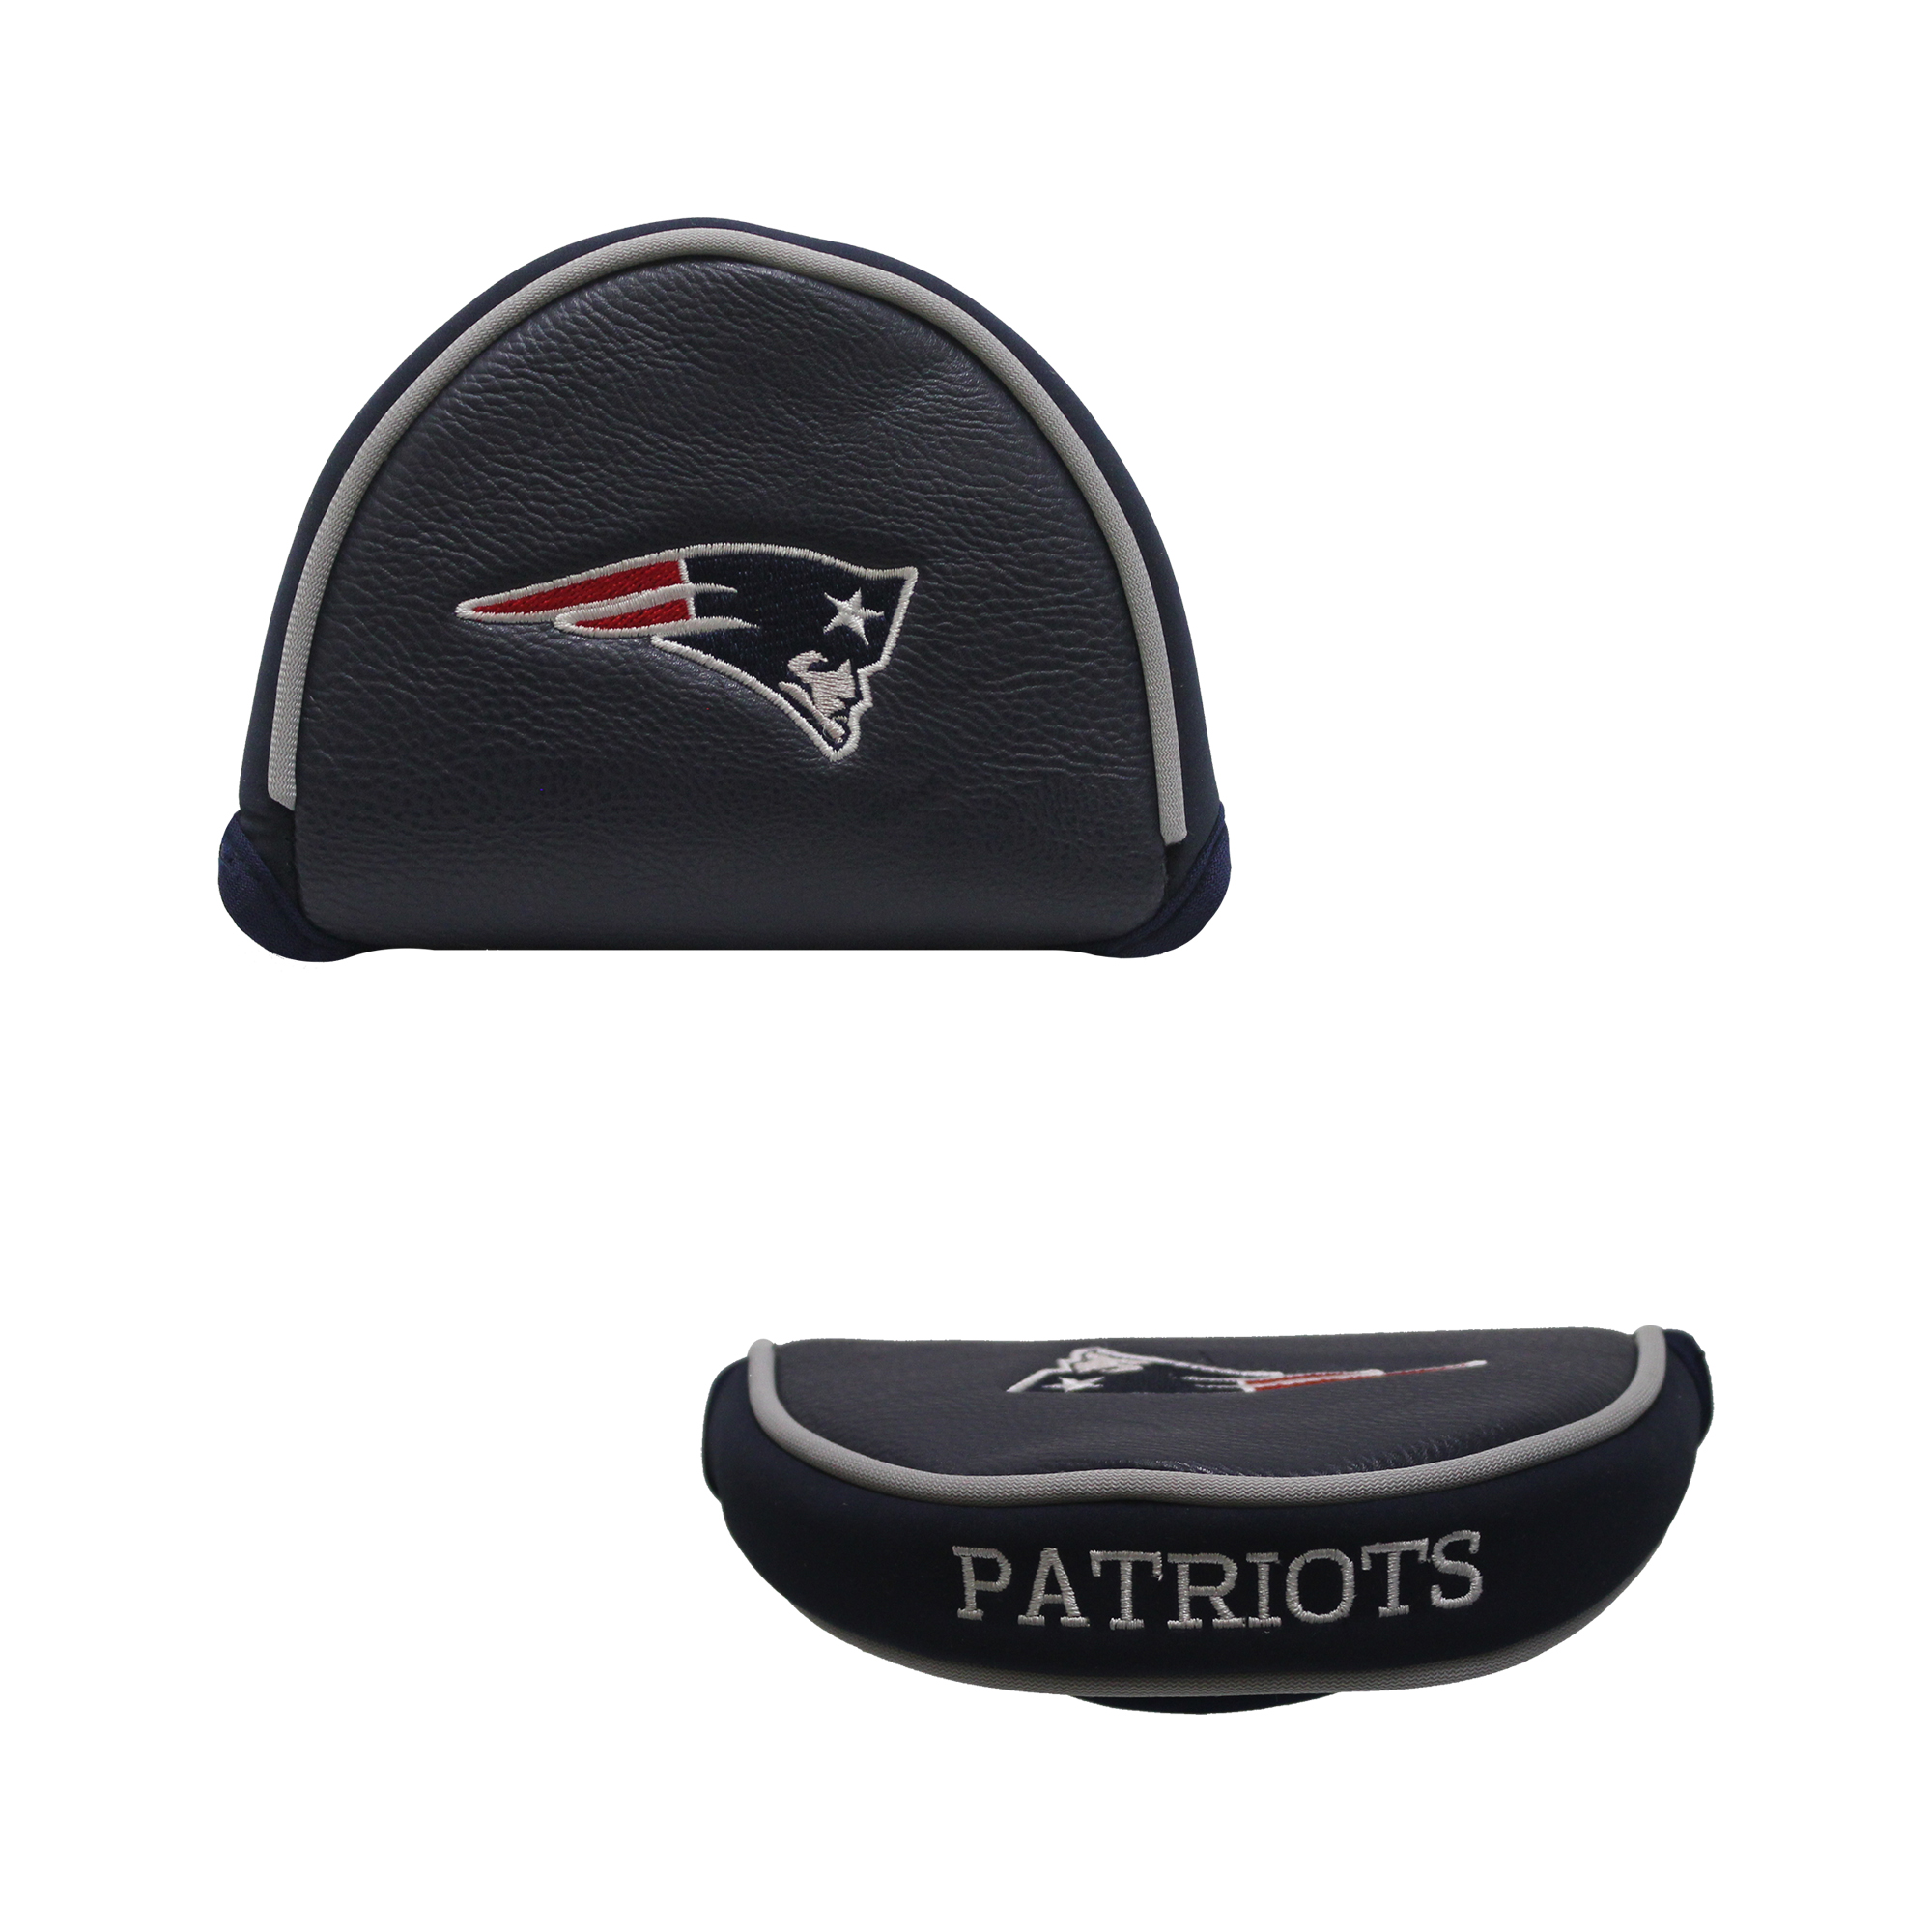 New England Patriots Mallet Putter Cover